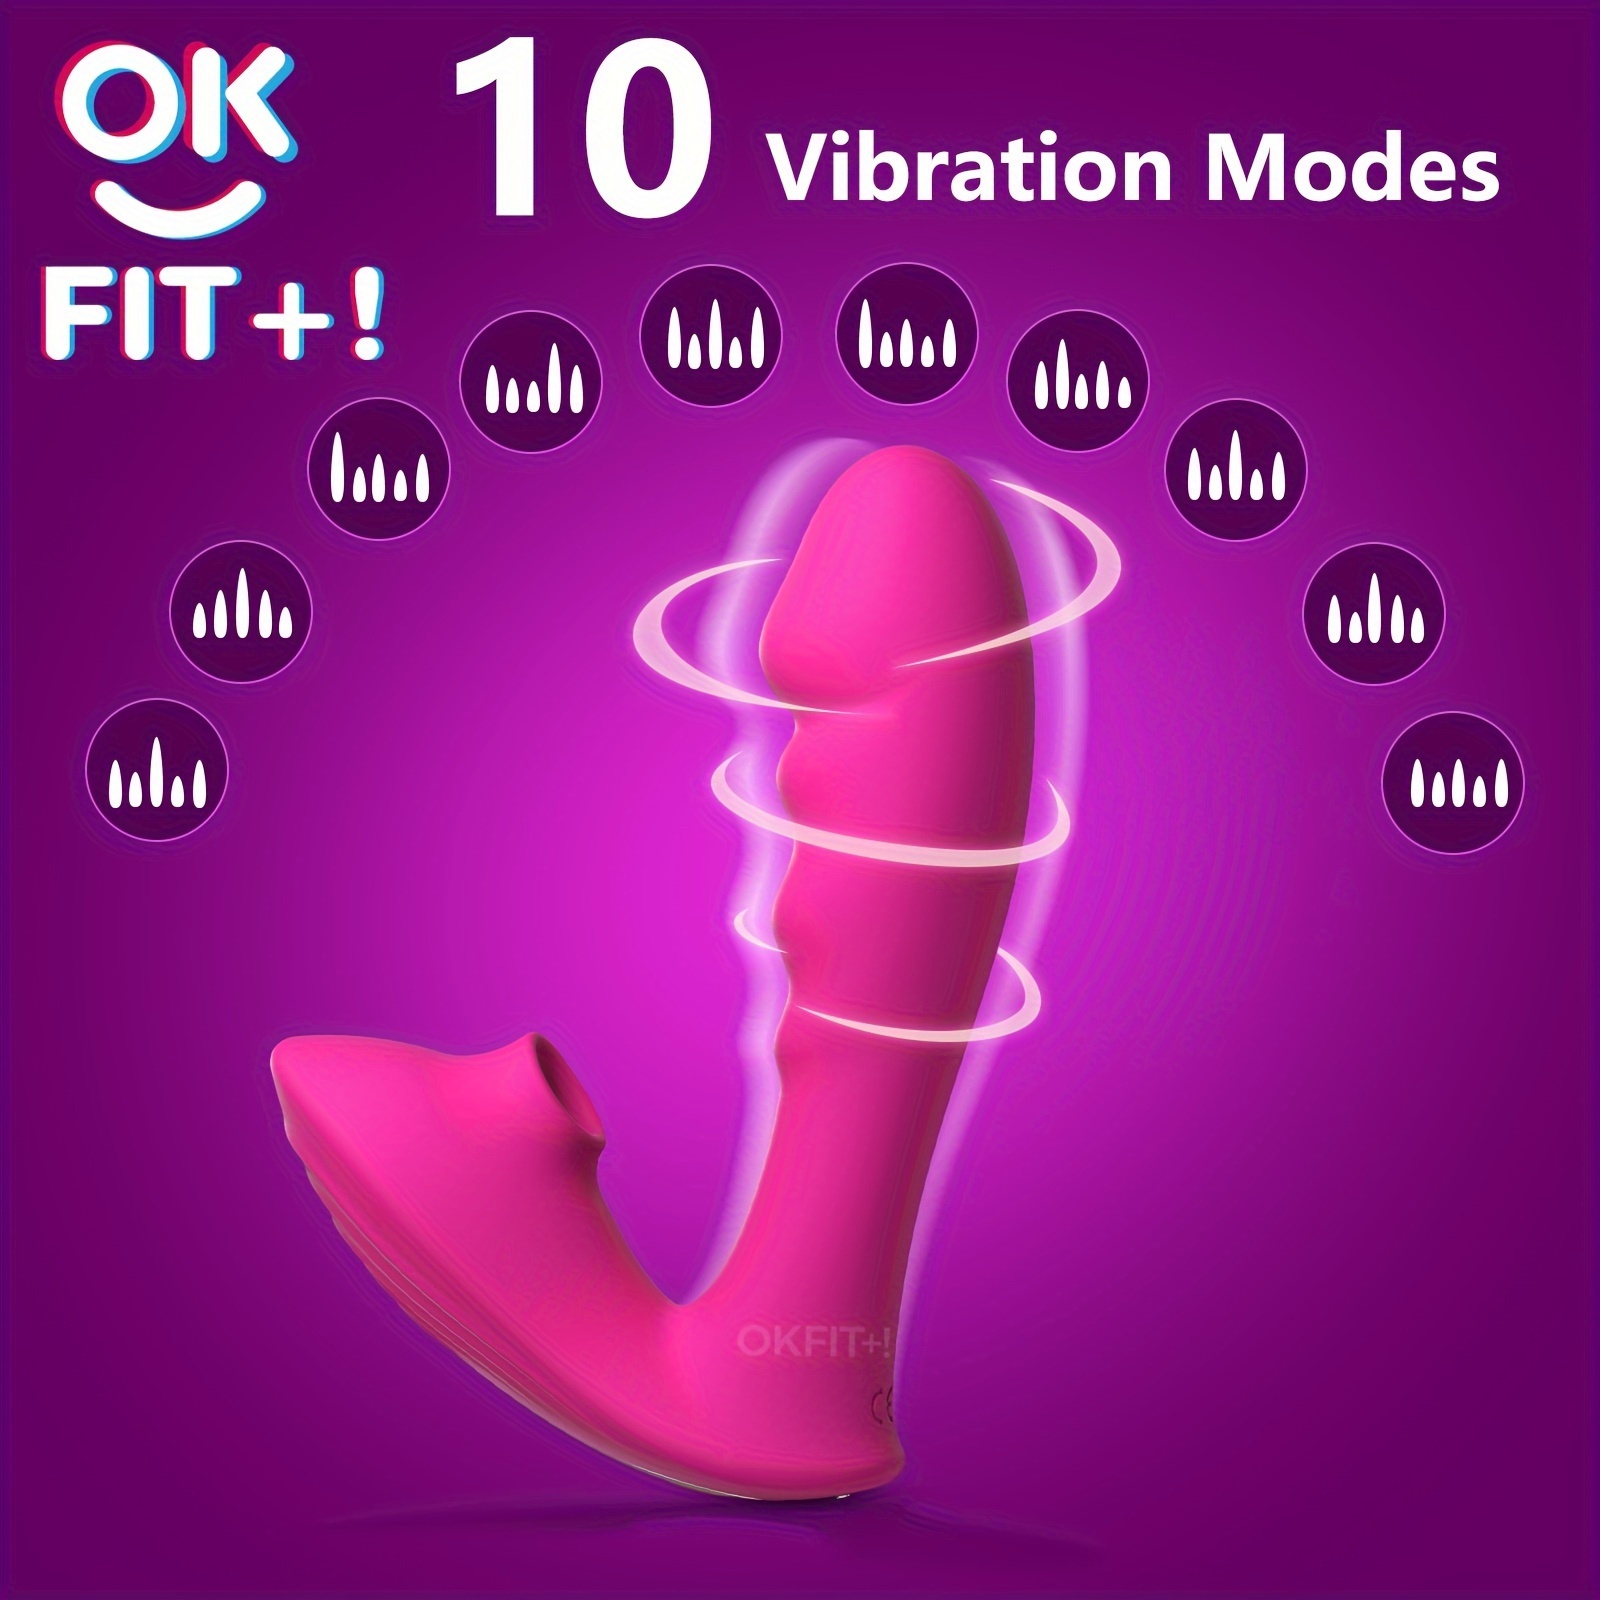 Wearable G Spot Vibrator, Lifelike Sucking Vibrator, Clitoral Anal Nipple Stimulator, Clit Tongue Licking Toy For Women, Adult Sex Toys For Pleasure, Dildo Vibrating Sex Toys For Women And Couples picture image